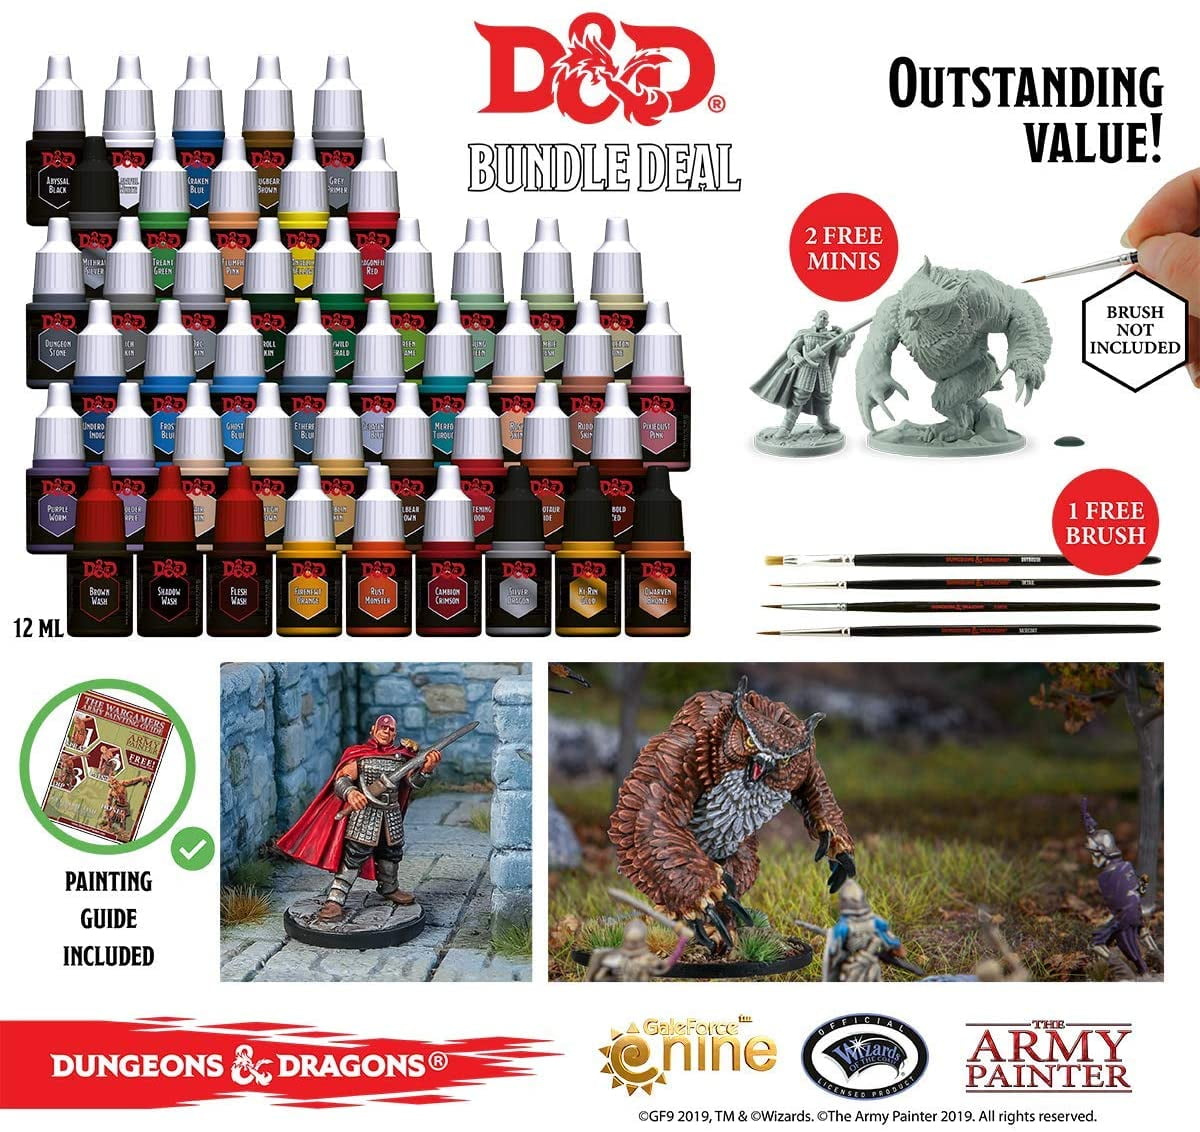 Quality Paint Brushes for Painting Miniatures by Dungeon Lair — Kickstarter